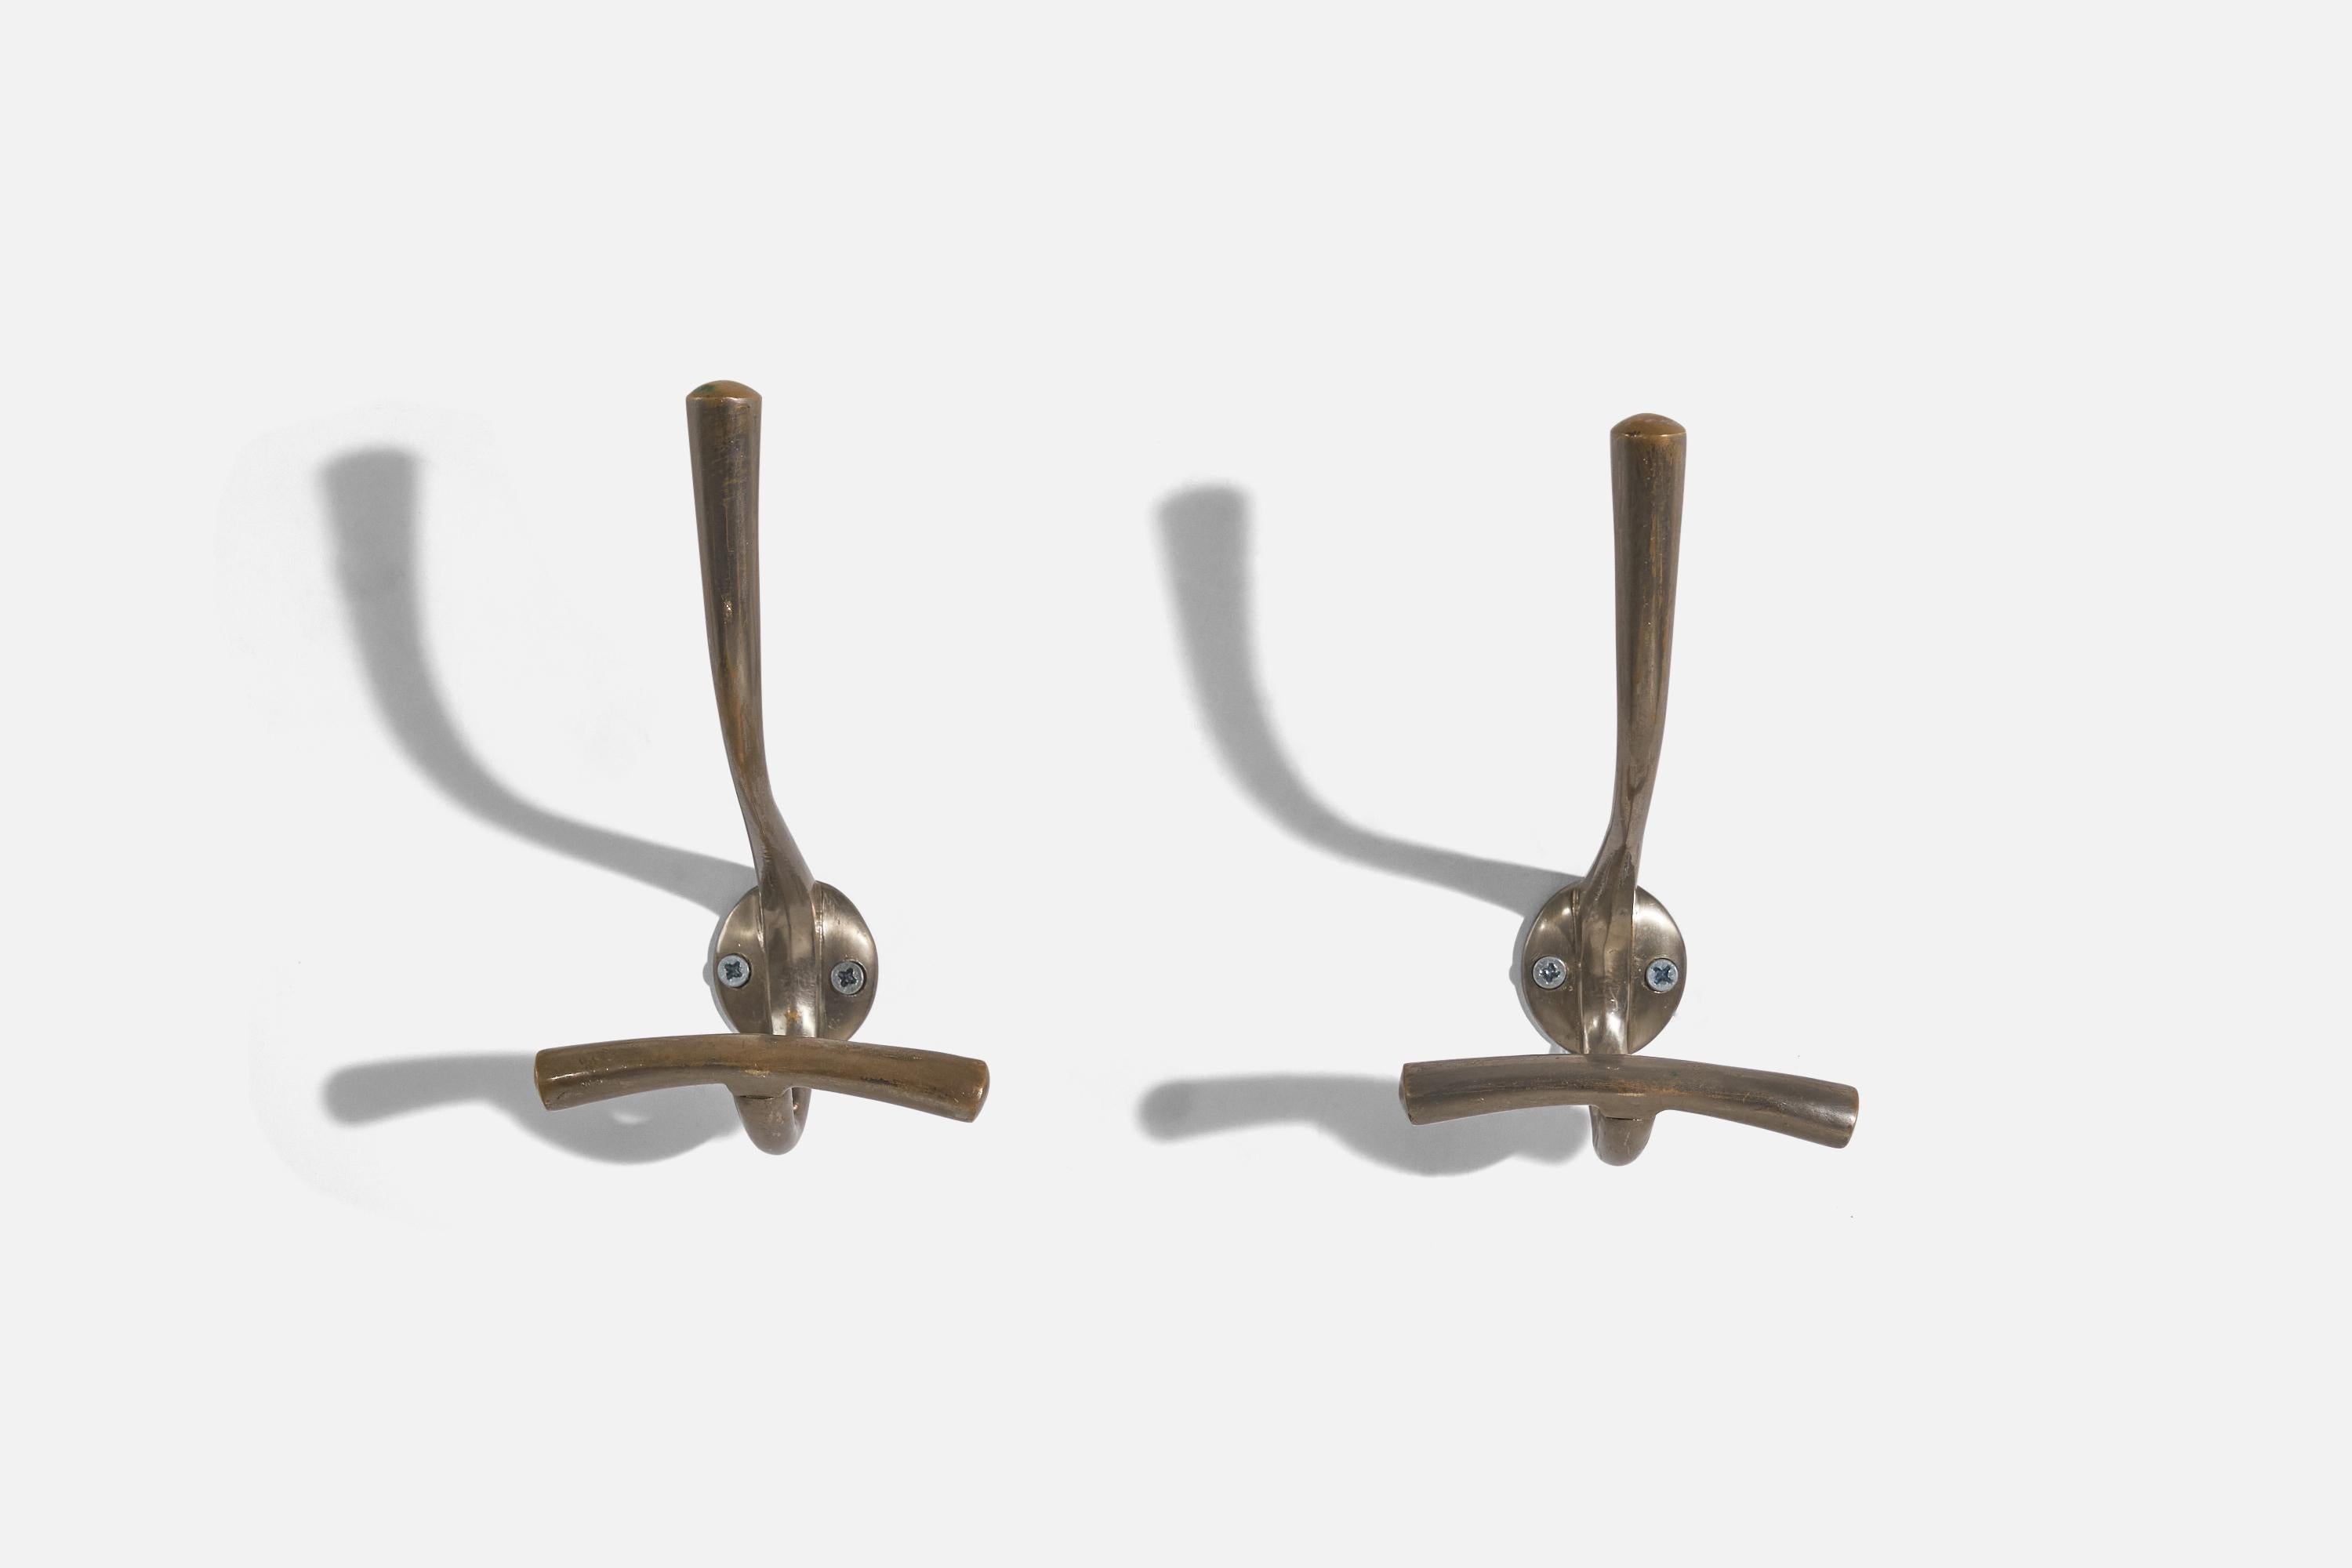 A pair of metal coat hangers designed and produced by Luigi Caccia Dominioni, Italy, 1950s.

